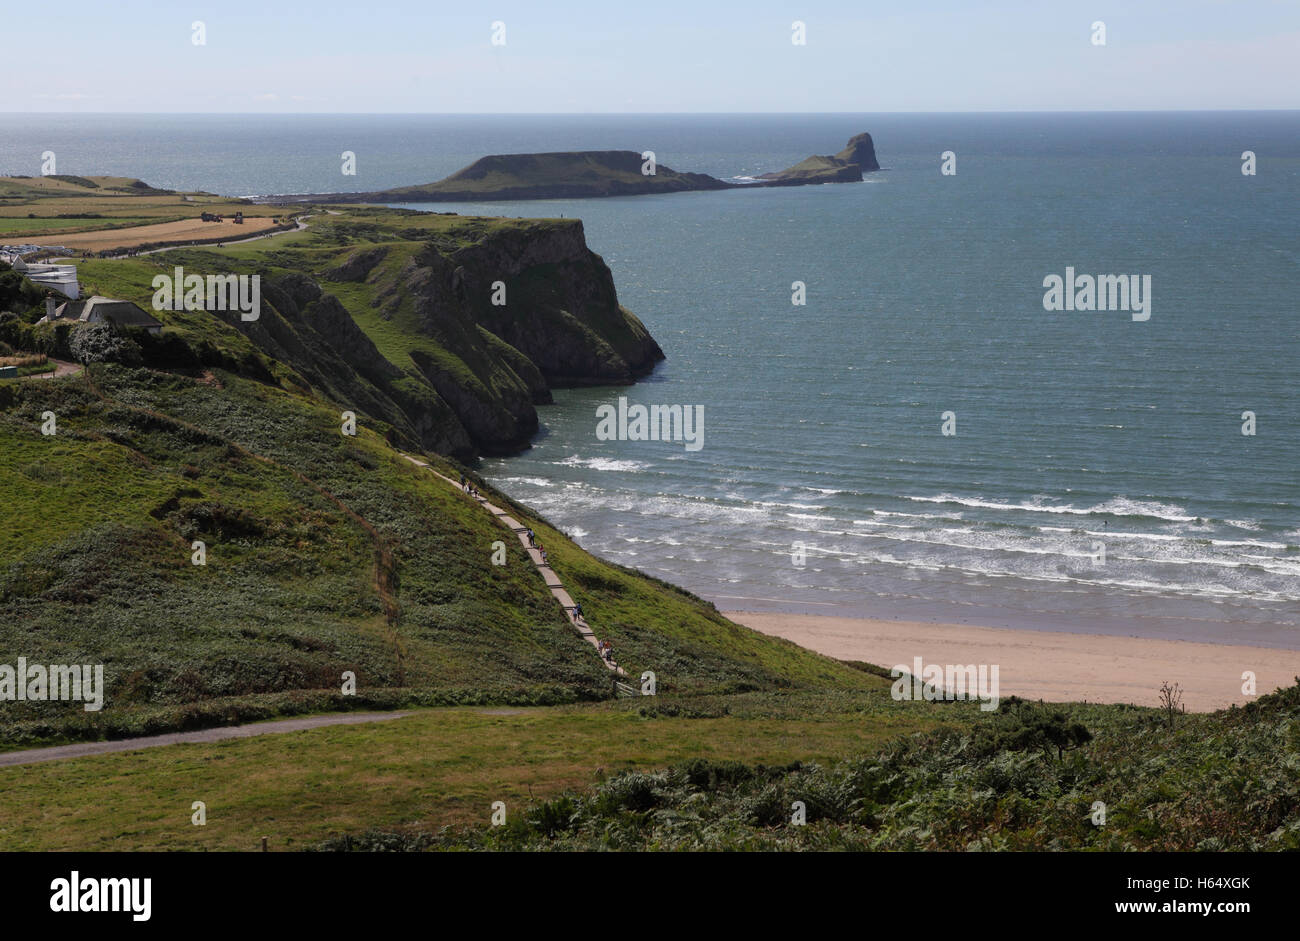 A view of Rhossili Village, the steep cliffs over Rhossili Bay, Worm's Head rock and the Celtic Sea as seen from Cefn Bryn. Stock Photo